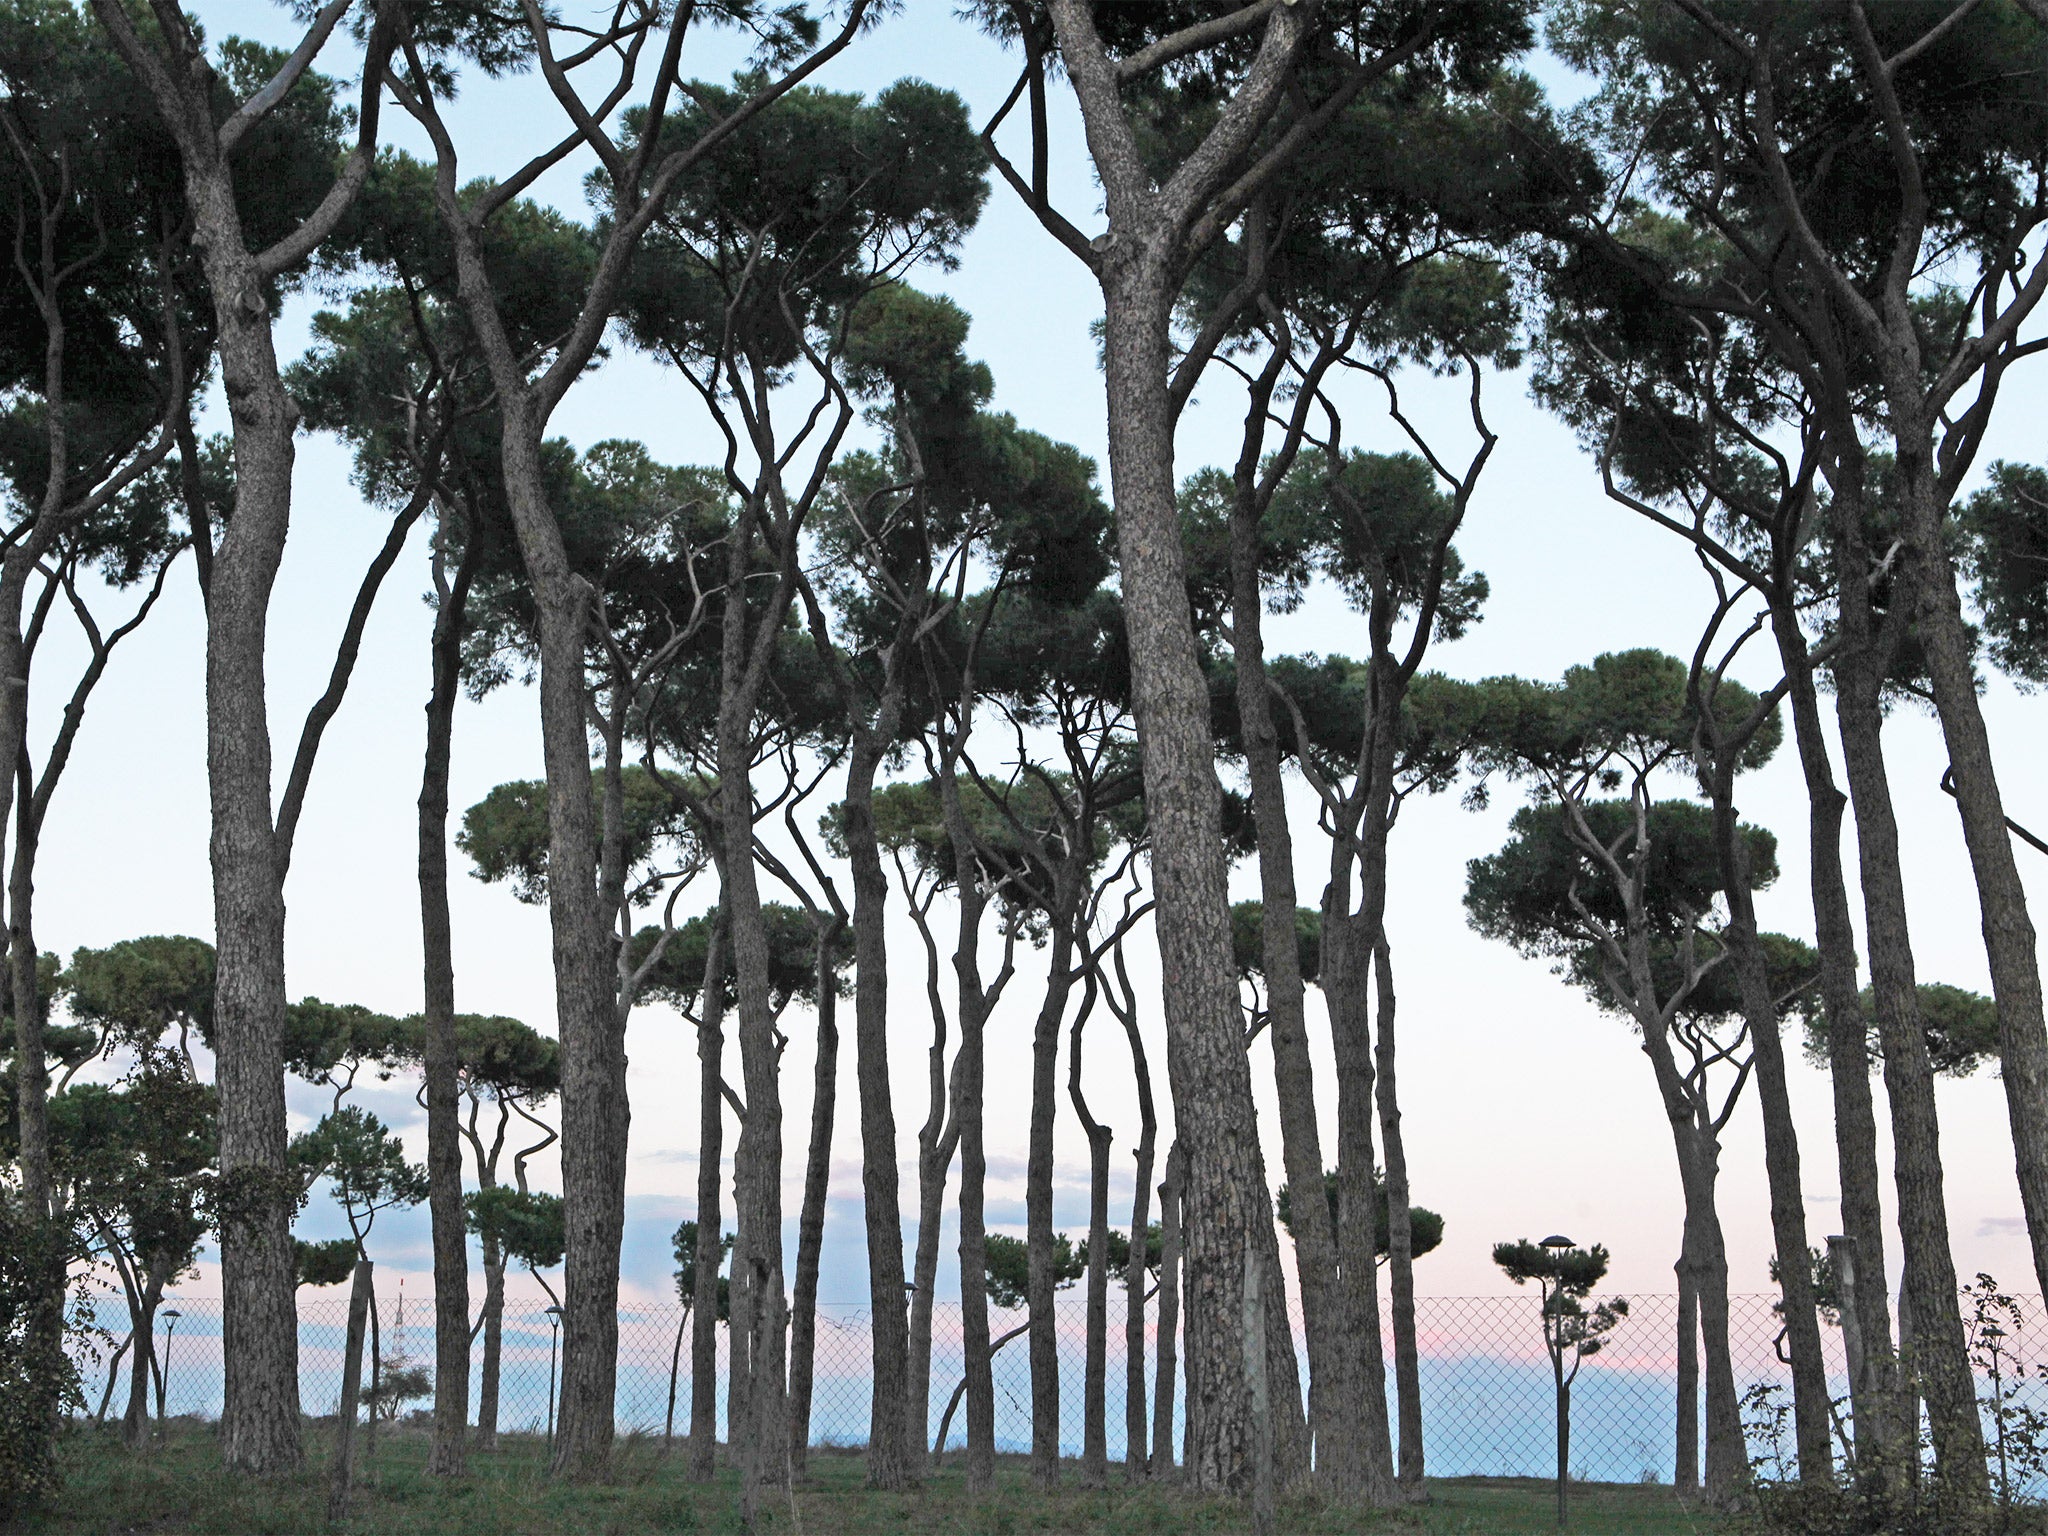 &#13;
Stone pines in La Pineta Sacchetti park in Rome. Forests in Russia and Korea are said to be in danger &#13;